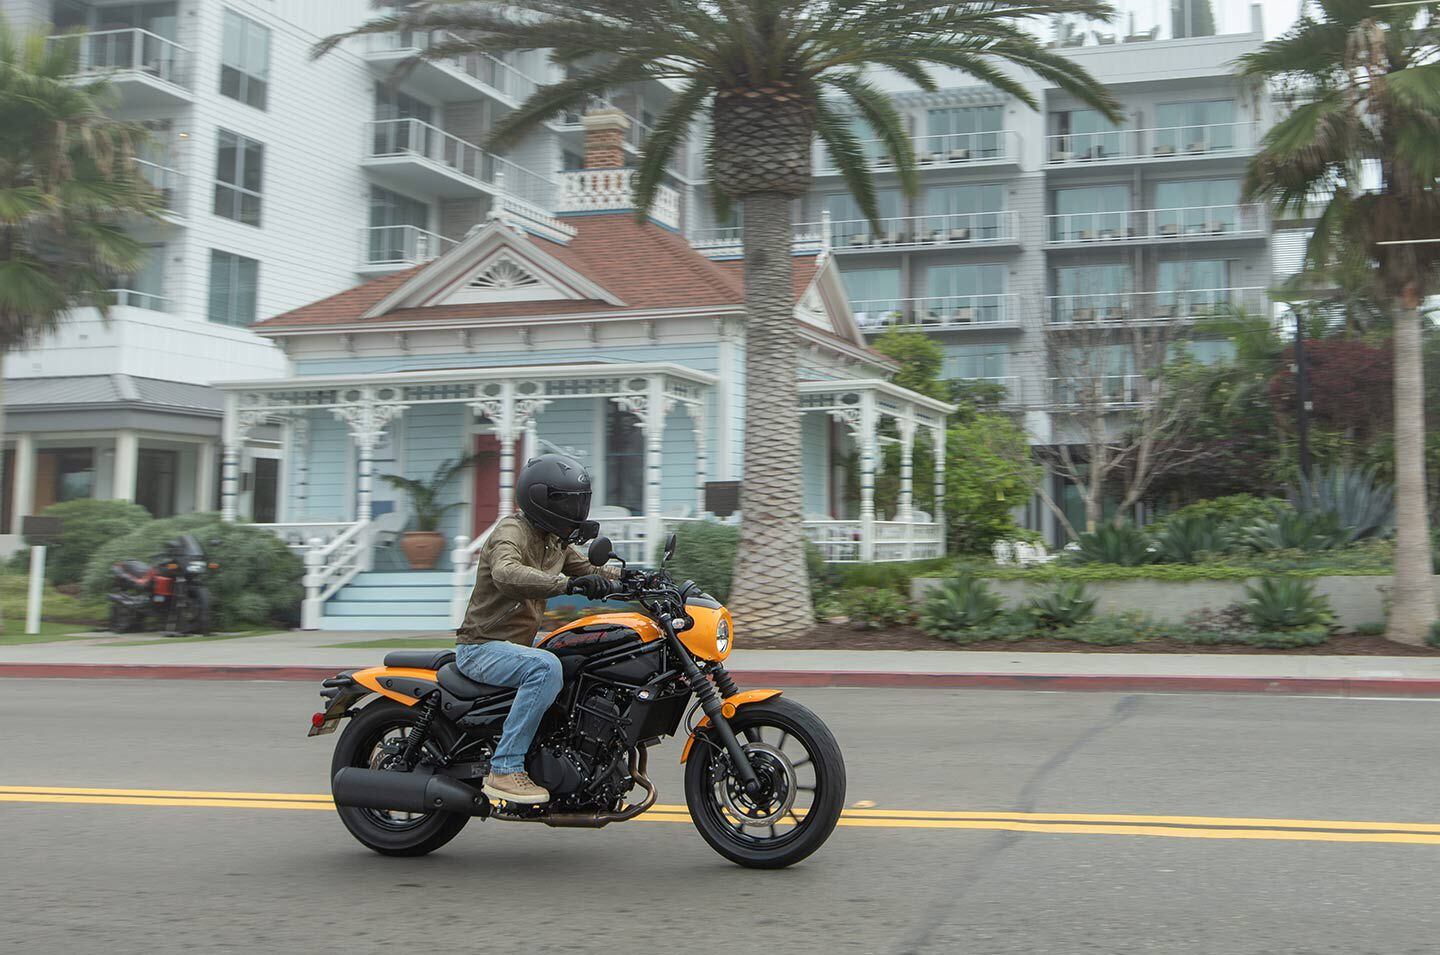 It was fitting to have the 2024 Kawasaki Eliminator launch at the Mission Pacific Hotel in Oceanside, California. In the background you can see an exact replica of Maverick’s Kawasaki ZX900 parked next to the original <i>Top Gun</i> house from the 1986 film.